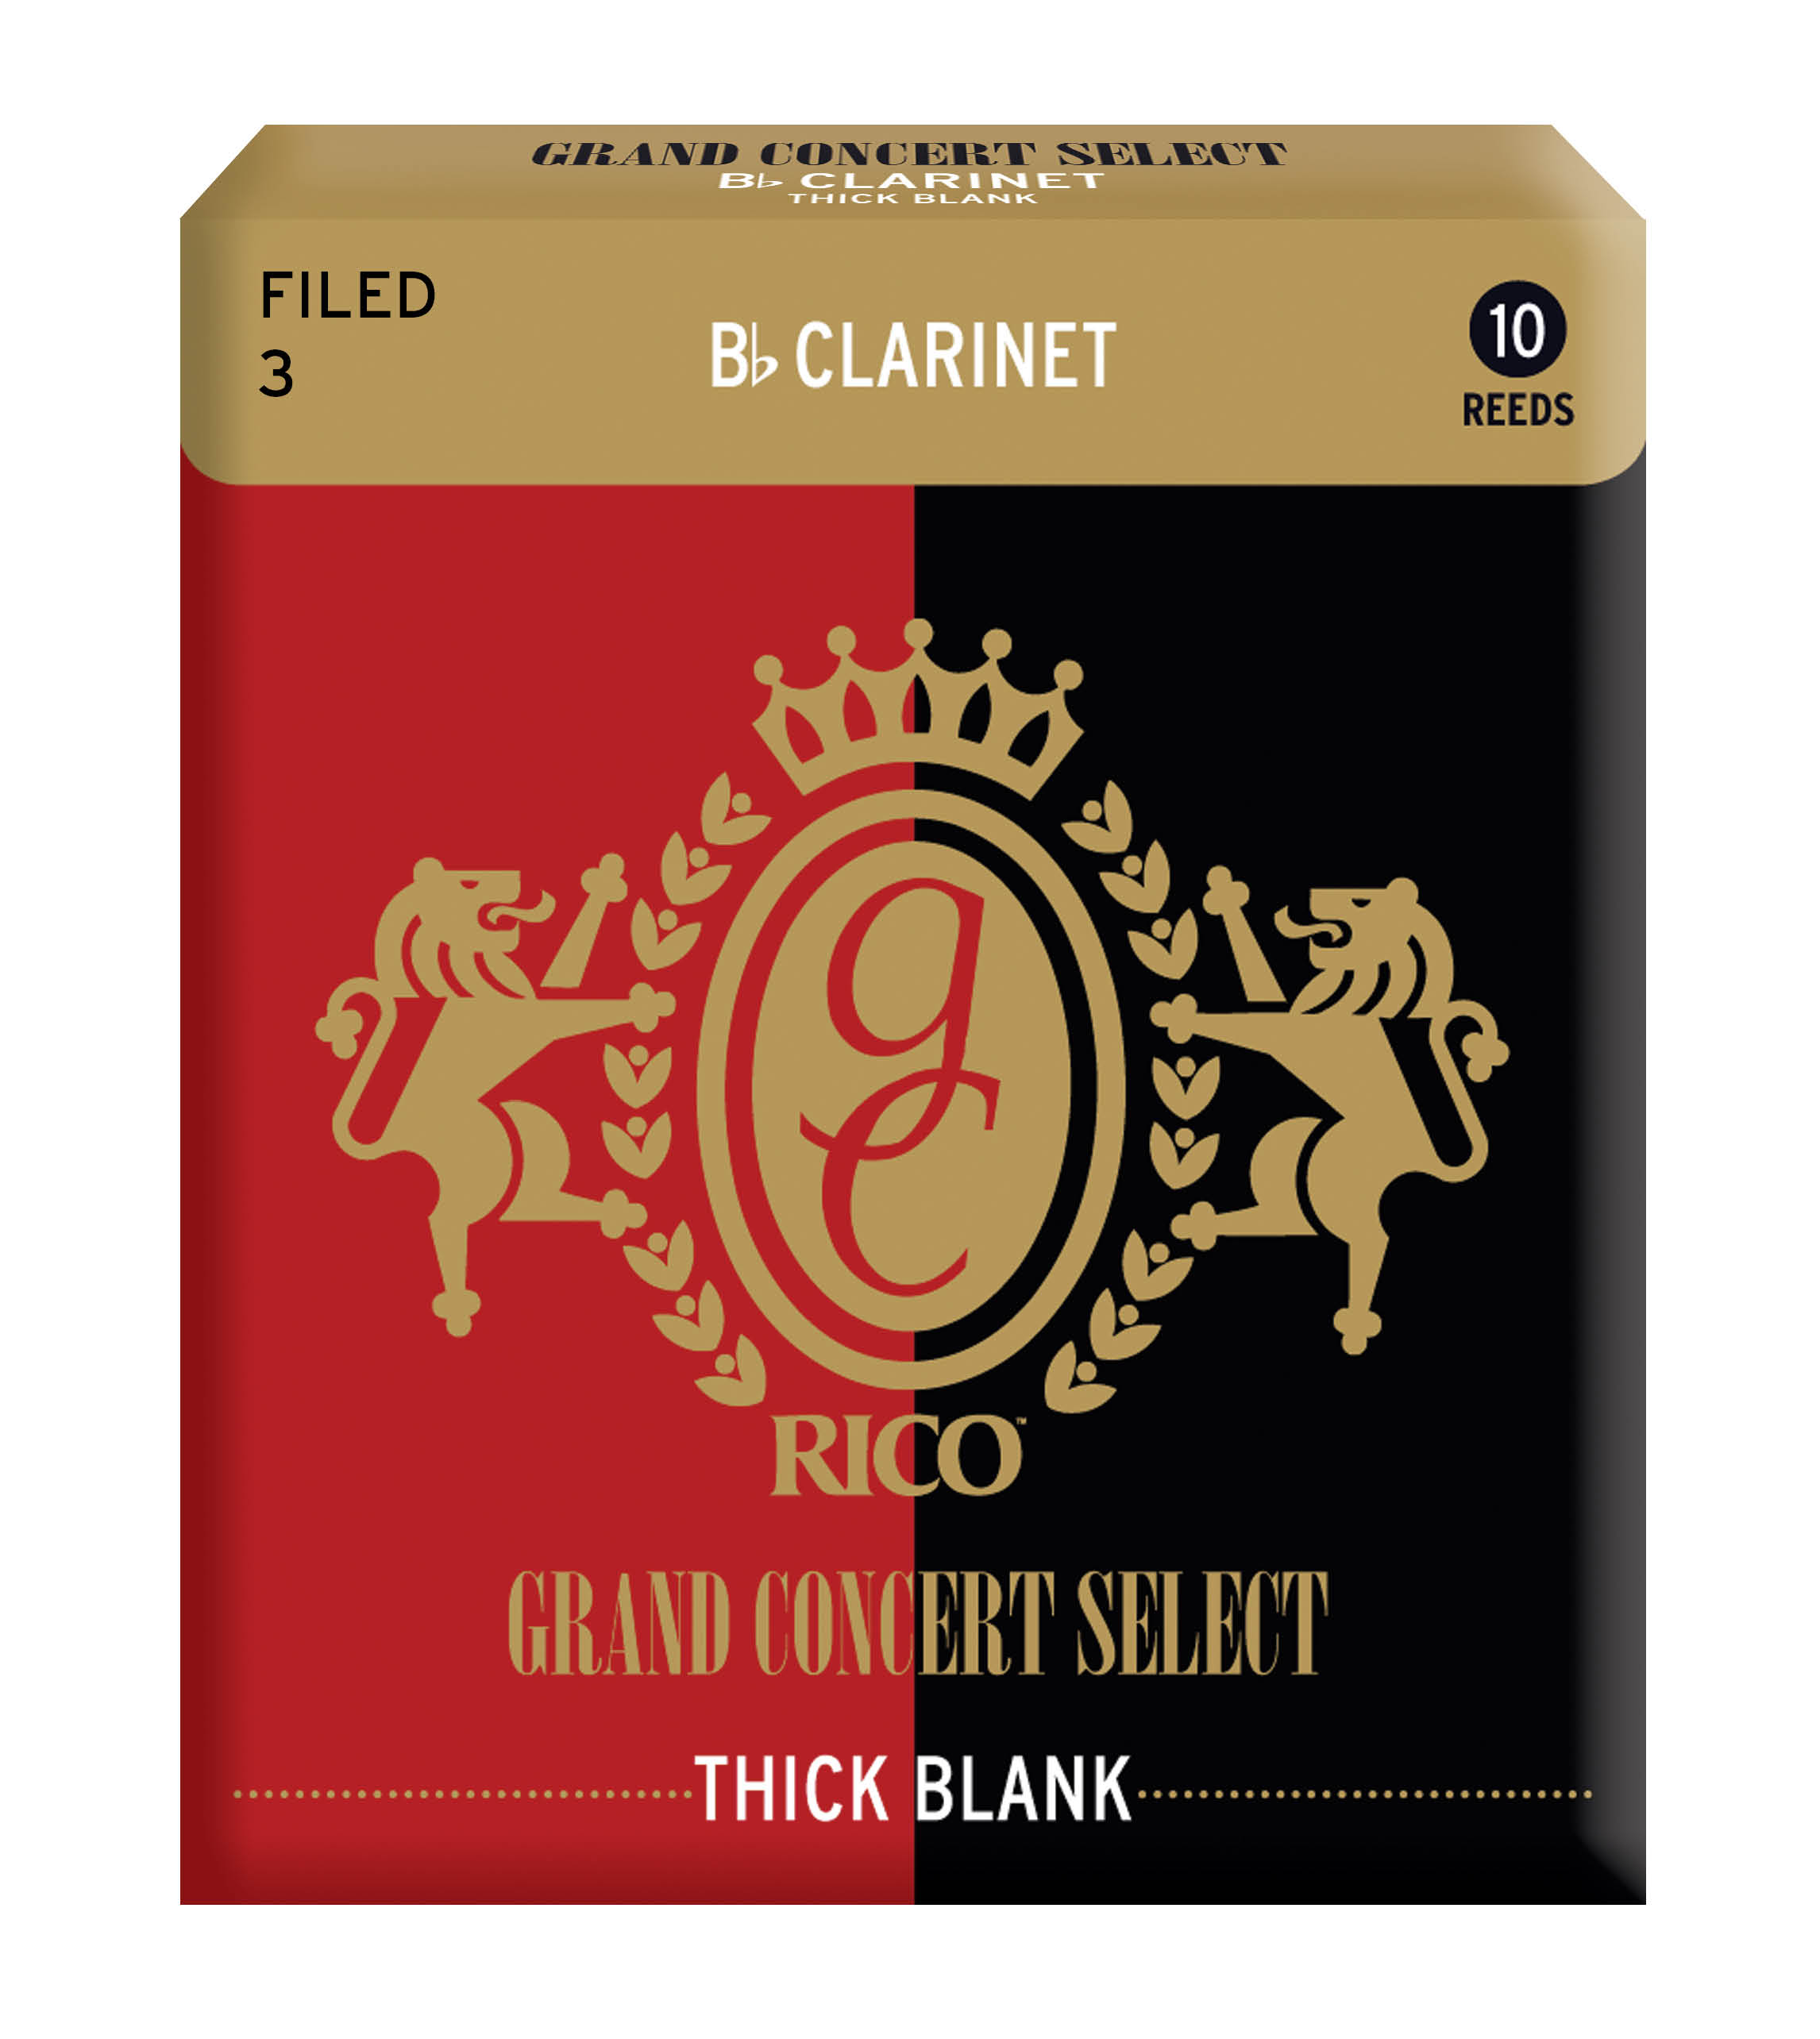 D'Addario Grand Concert Select Thick Blank Bb Clarinet Reeds, Filed, Strength 3.0, 10 Pack